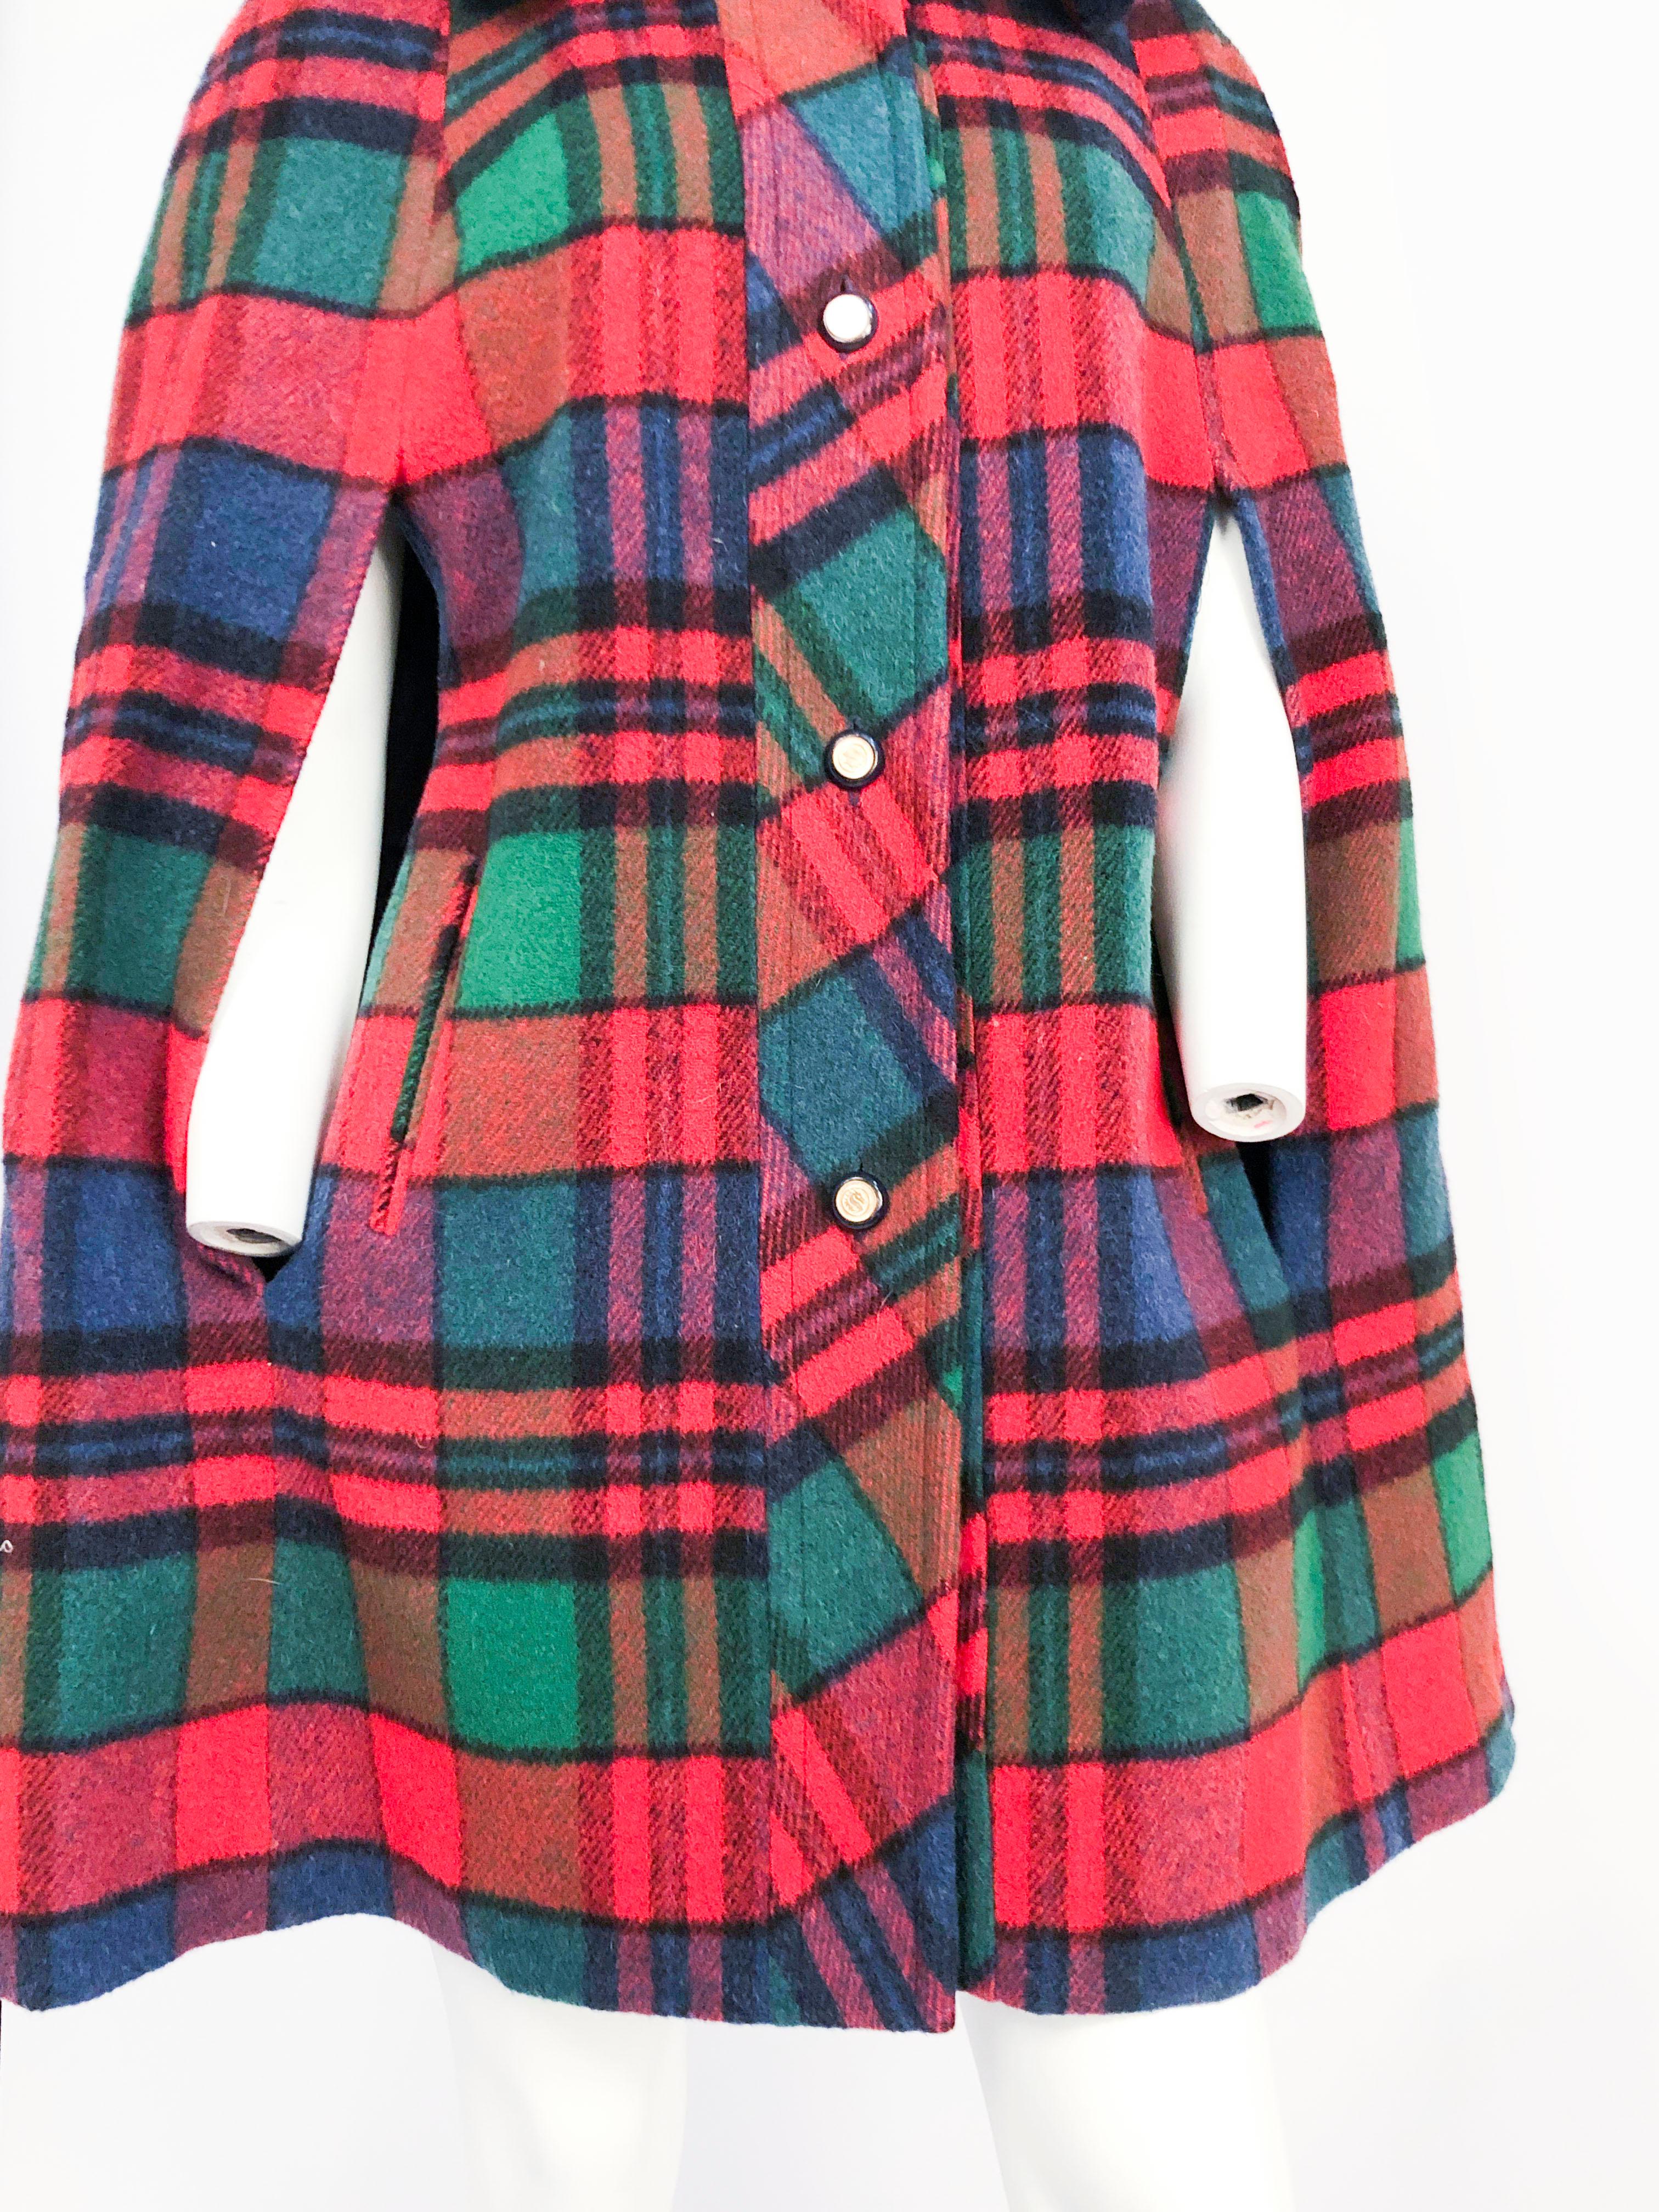 1960s Plaid Wool Cape with Navy Faux Fur Collar, decorated buttons, arm slits, pockets, and a full satin lining.